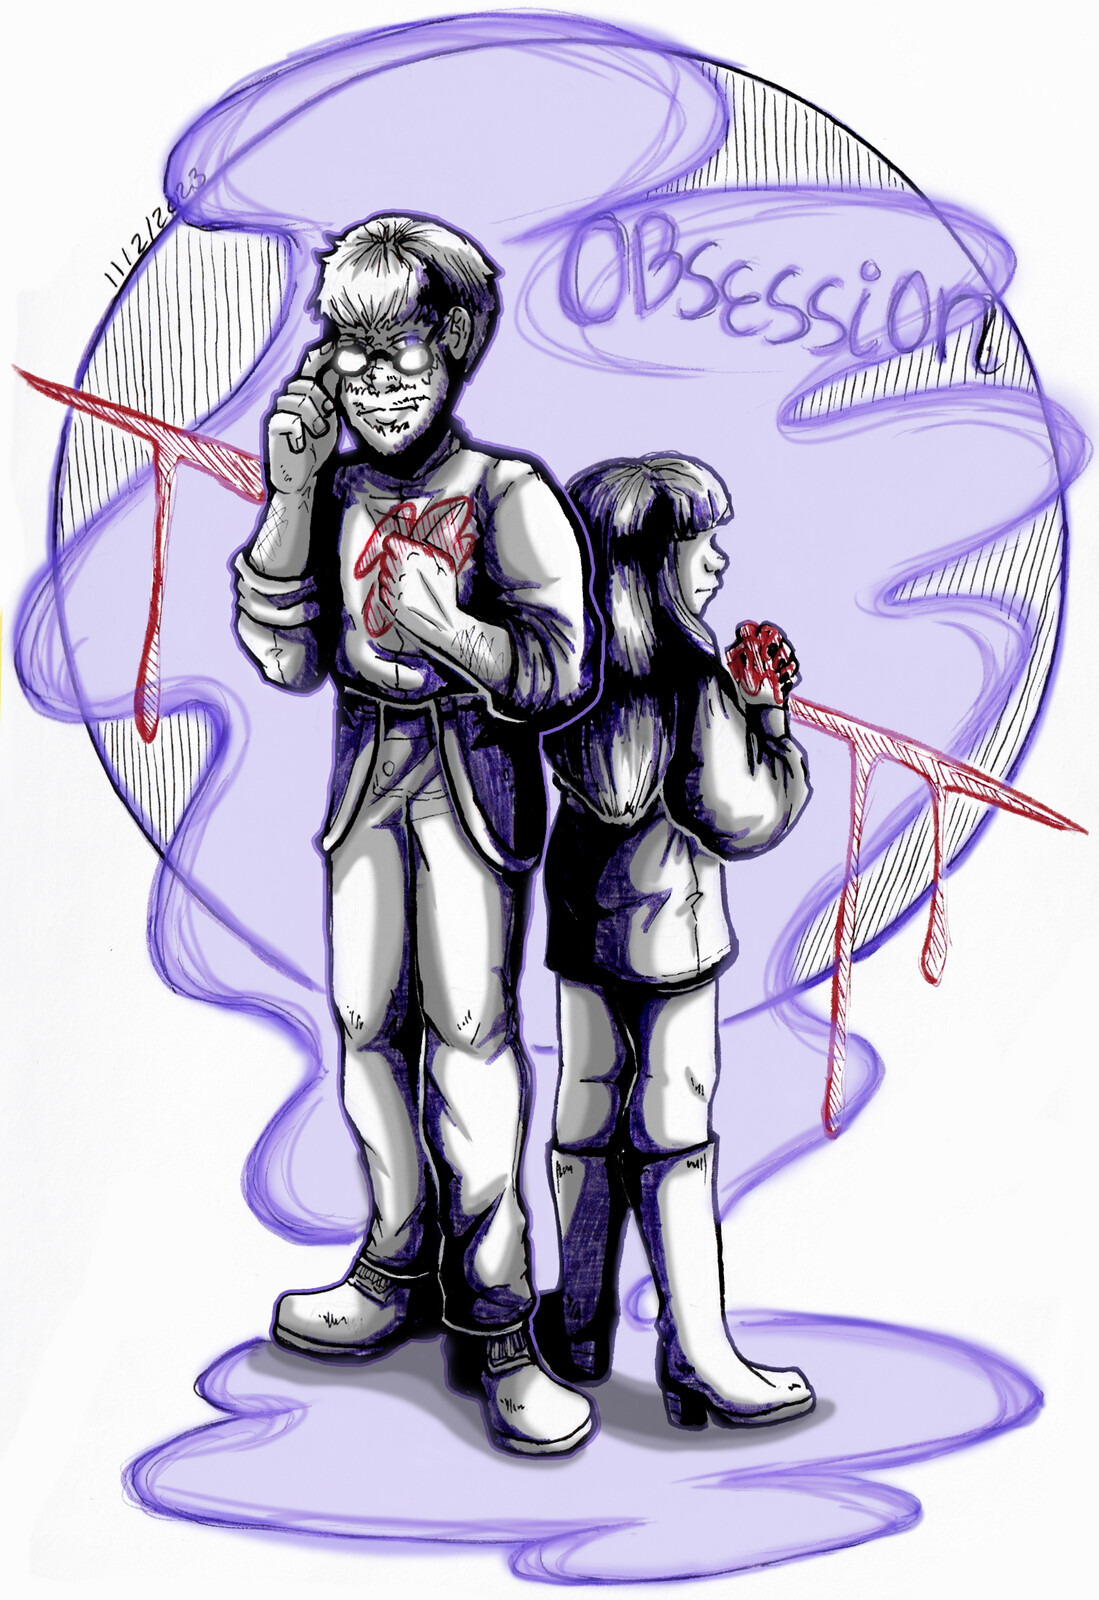 Obsession 
- Isaac and Mink